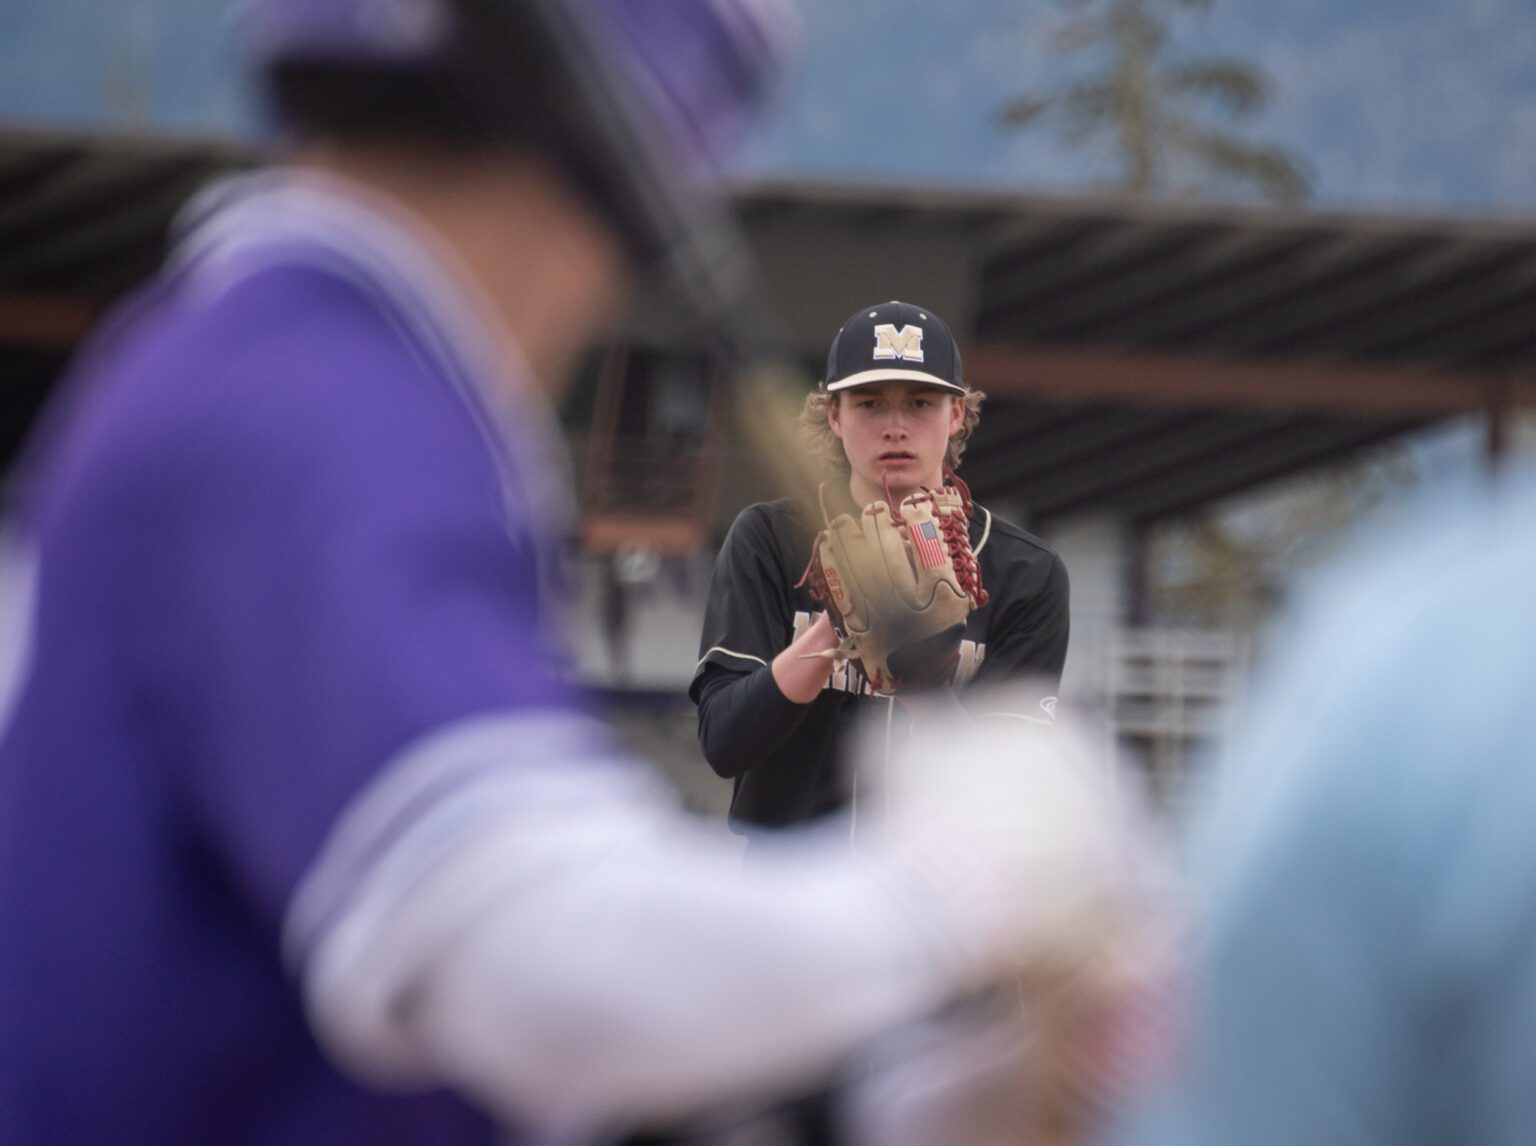 Meridian freshman pitcher Nate Payne stares down a Nooksack Valley batter Tuesday, April 2 in the first inning of the Trojans' 5-1 win in Everson. Payne tossed a complete game.